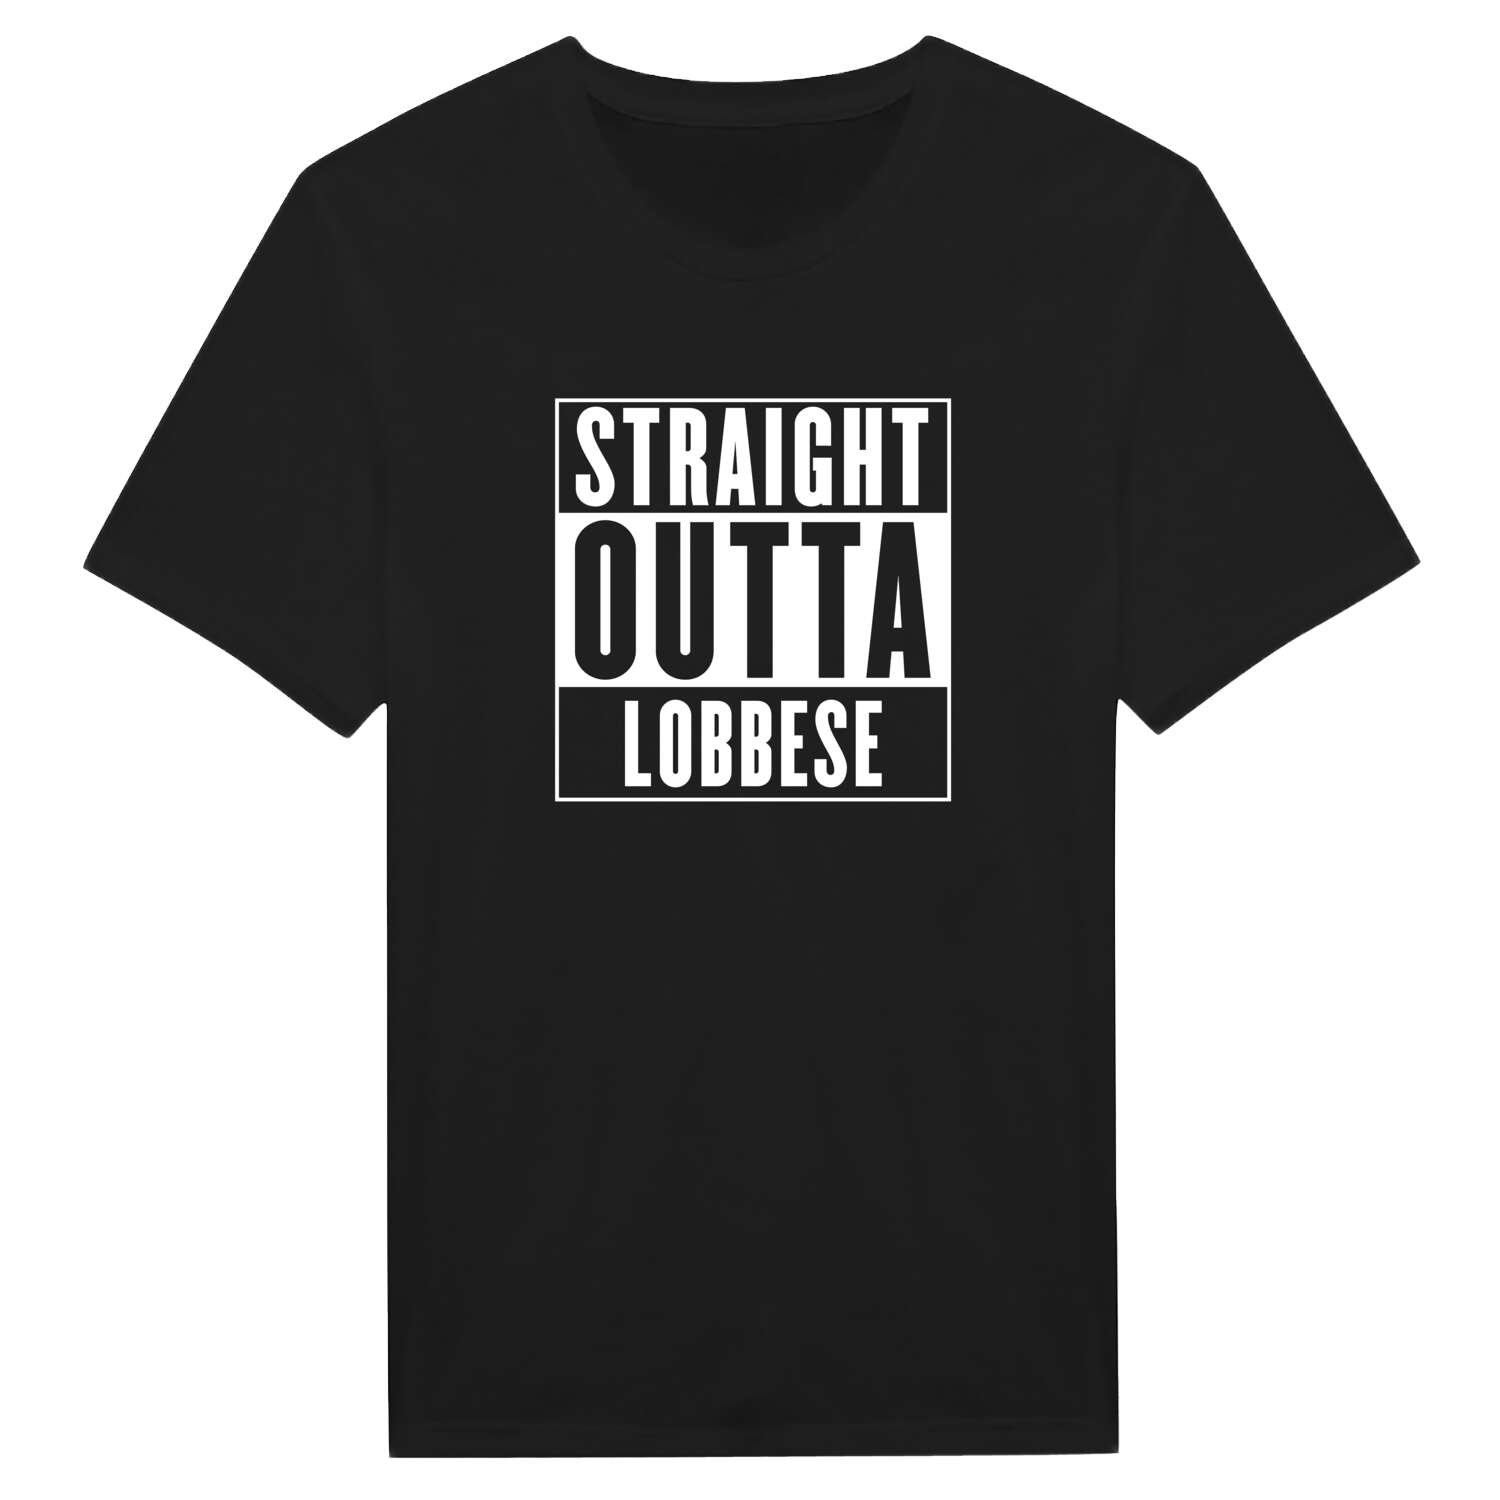 Lobbese T-Shirt »Straight Outta«